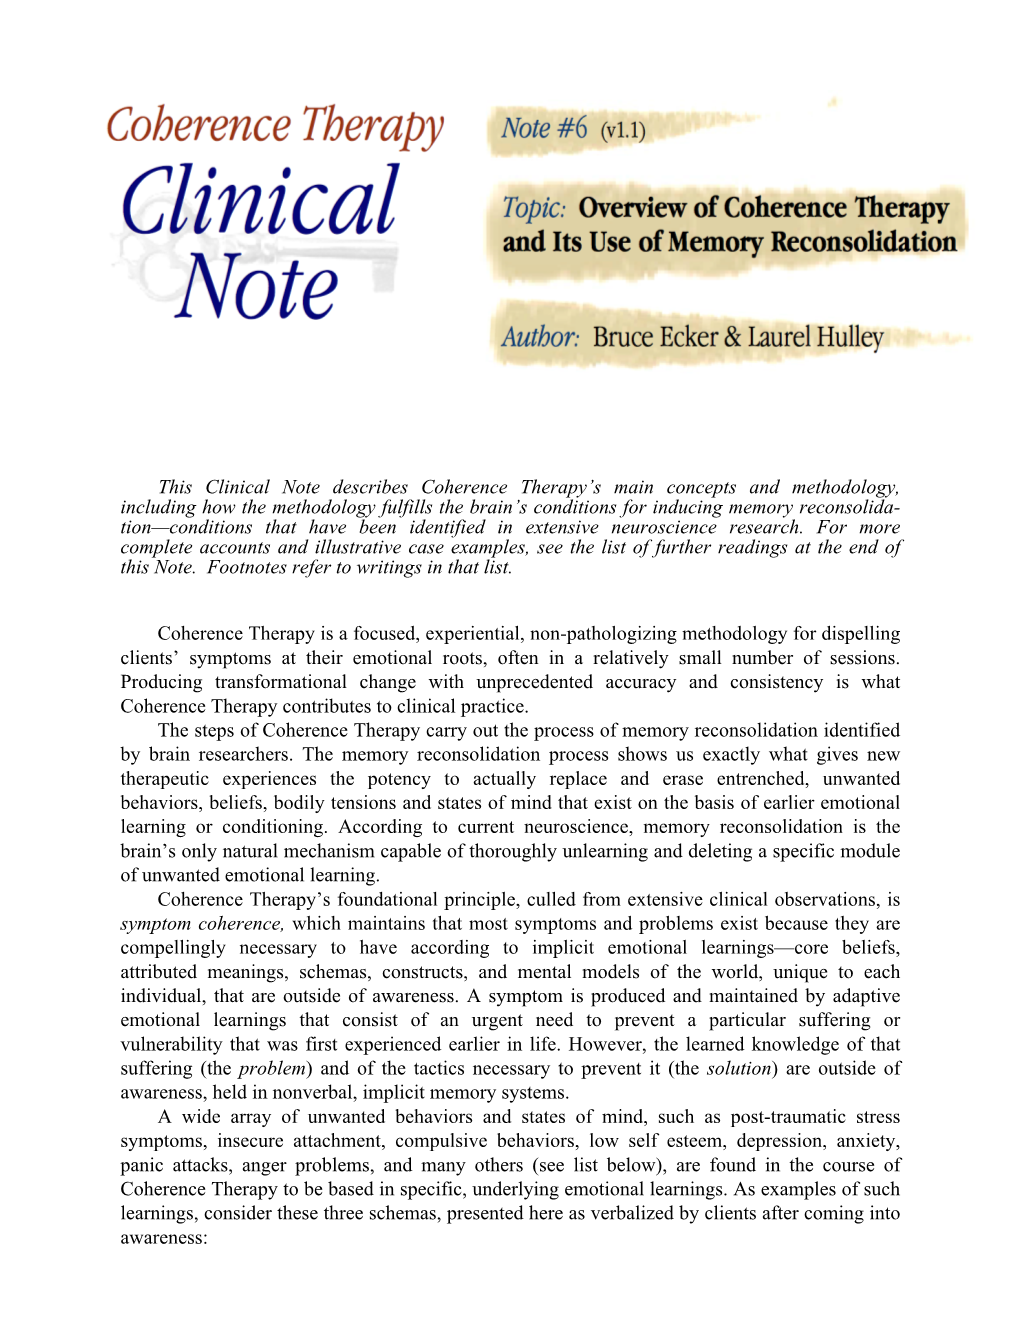 Clinical Note